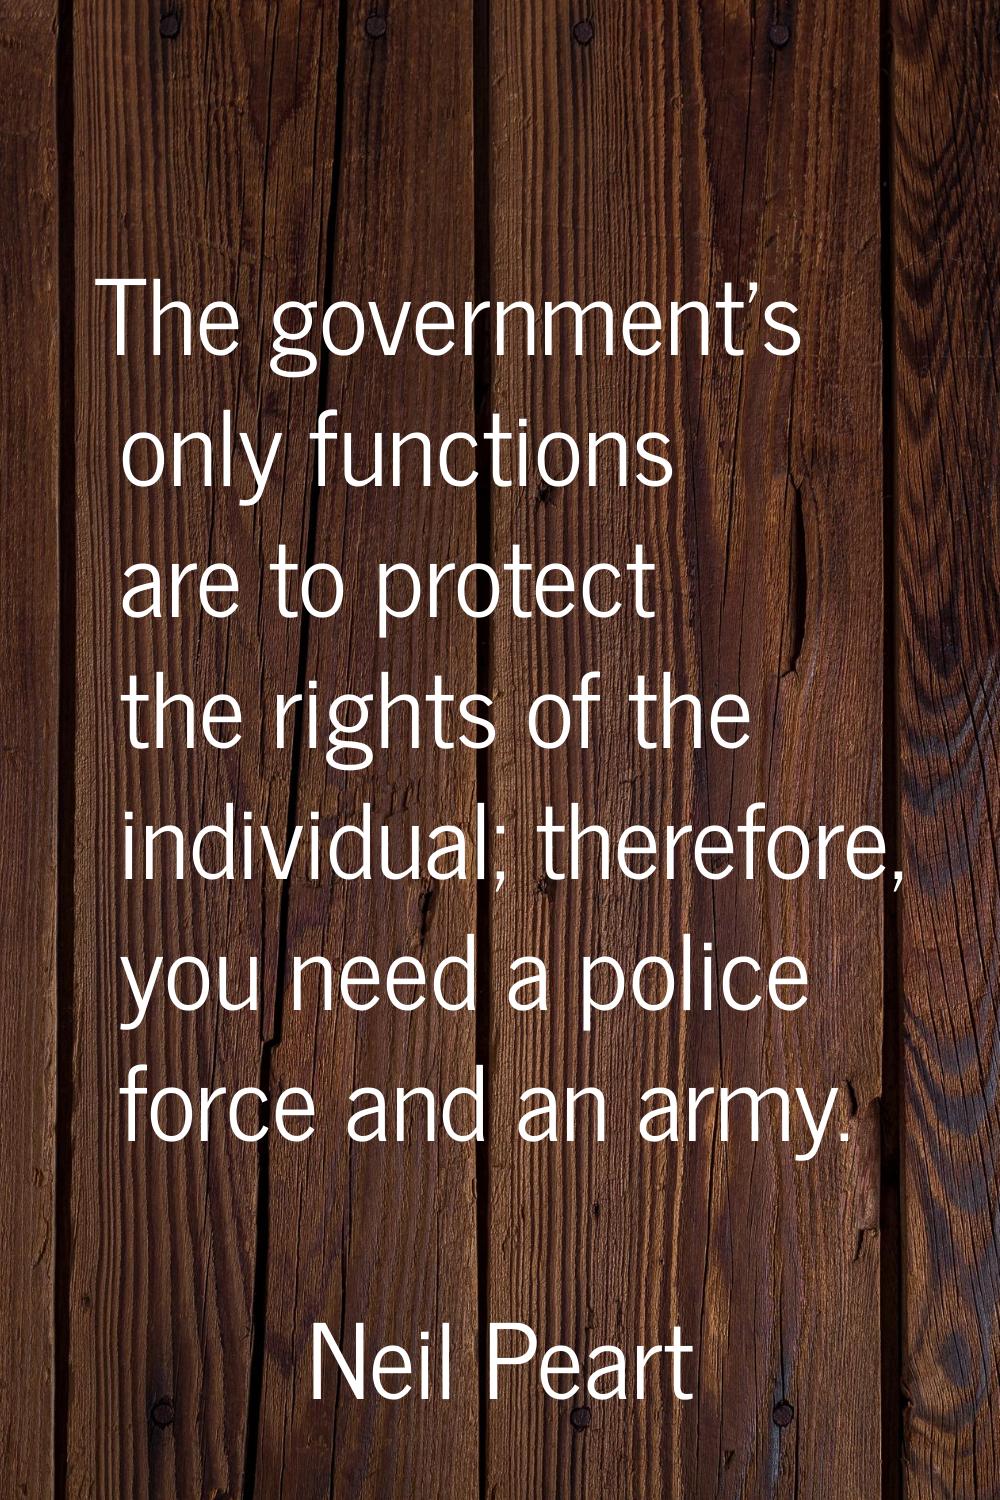 The government's only functions are to protect the rights of the individual; therefore, you need a 